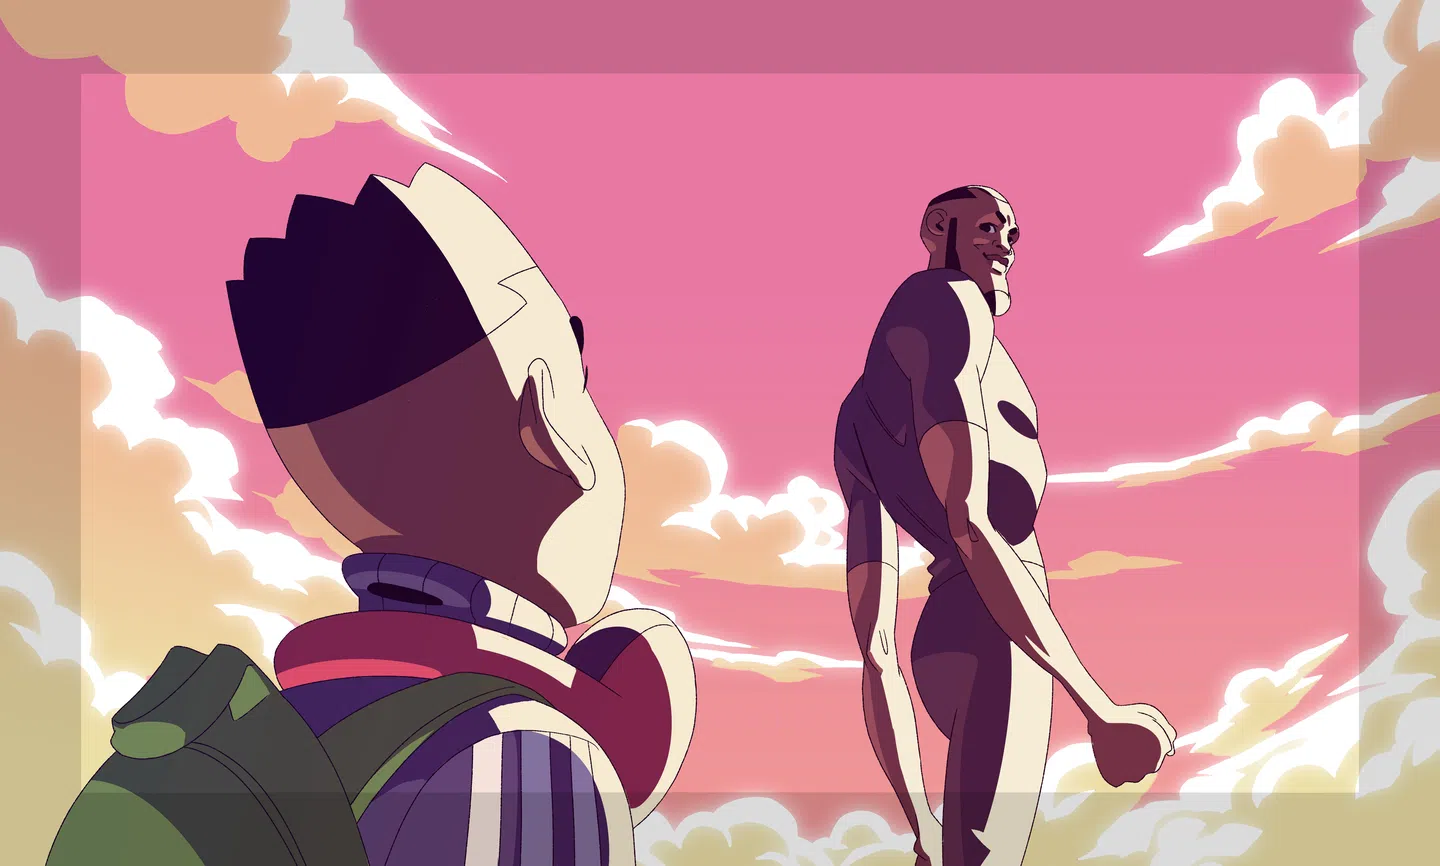 The story behind the new animated music video for Stormzy's Superheroes